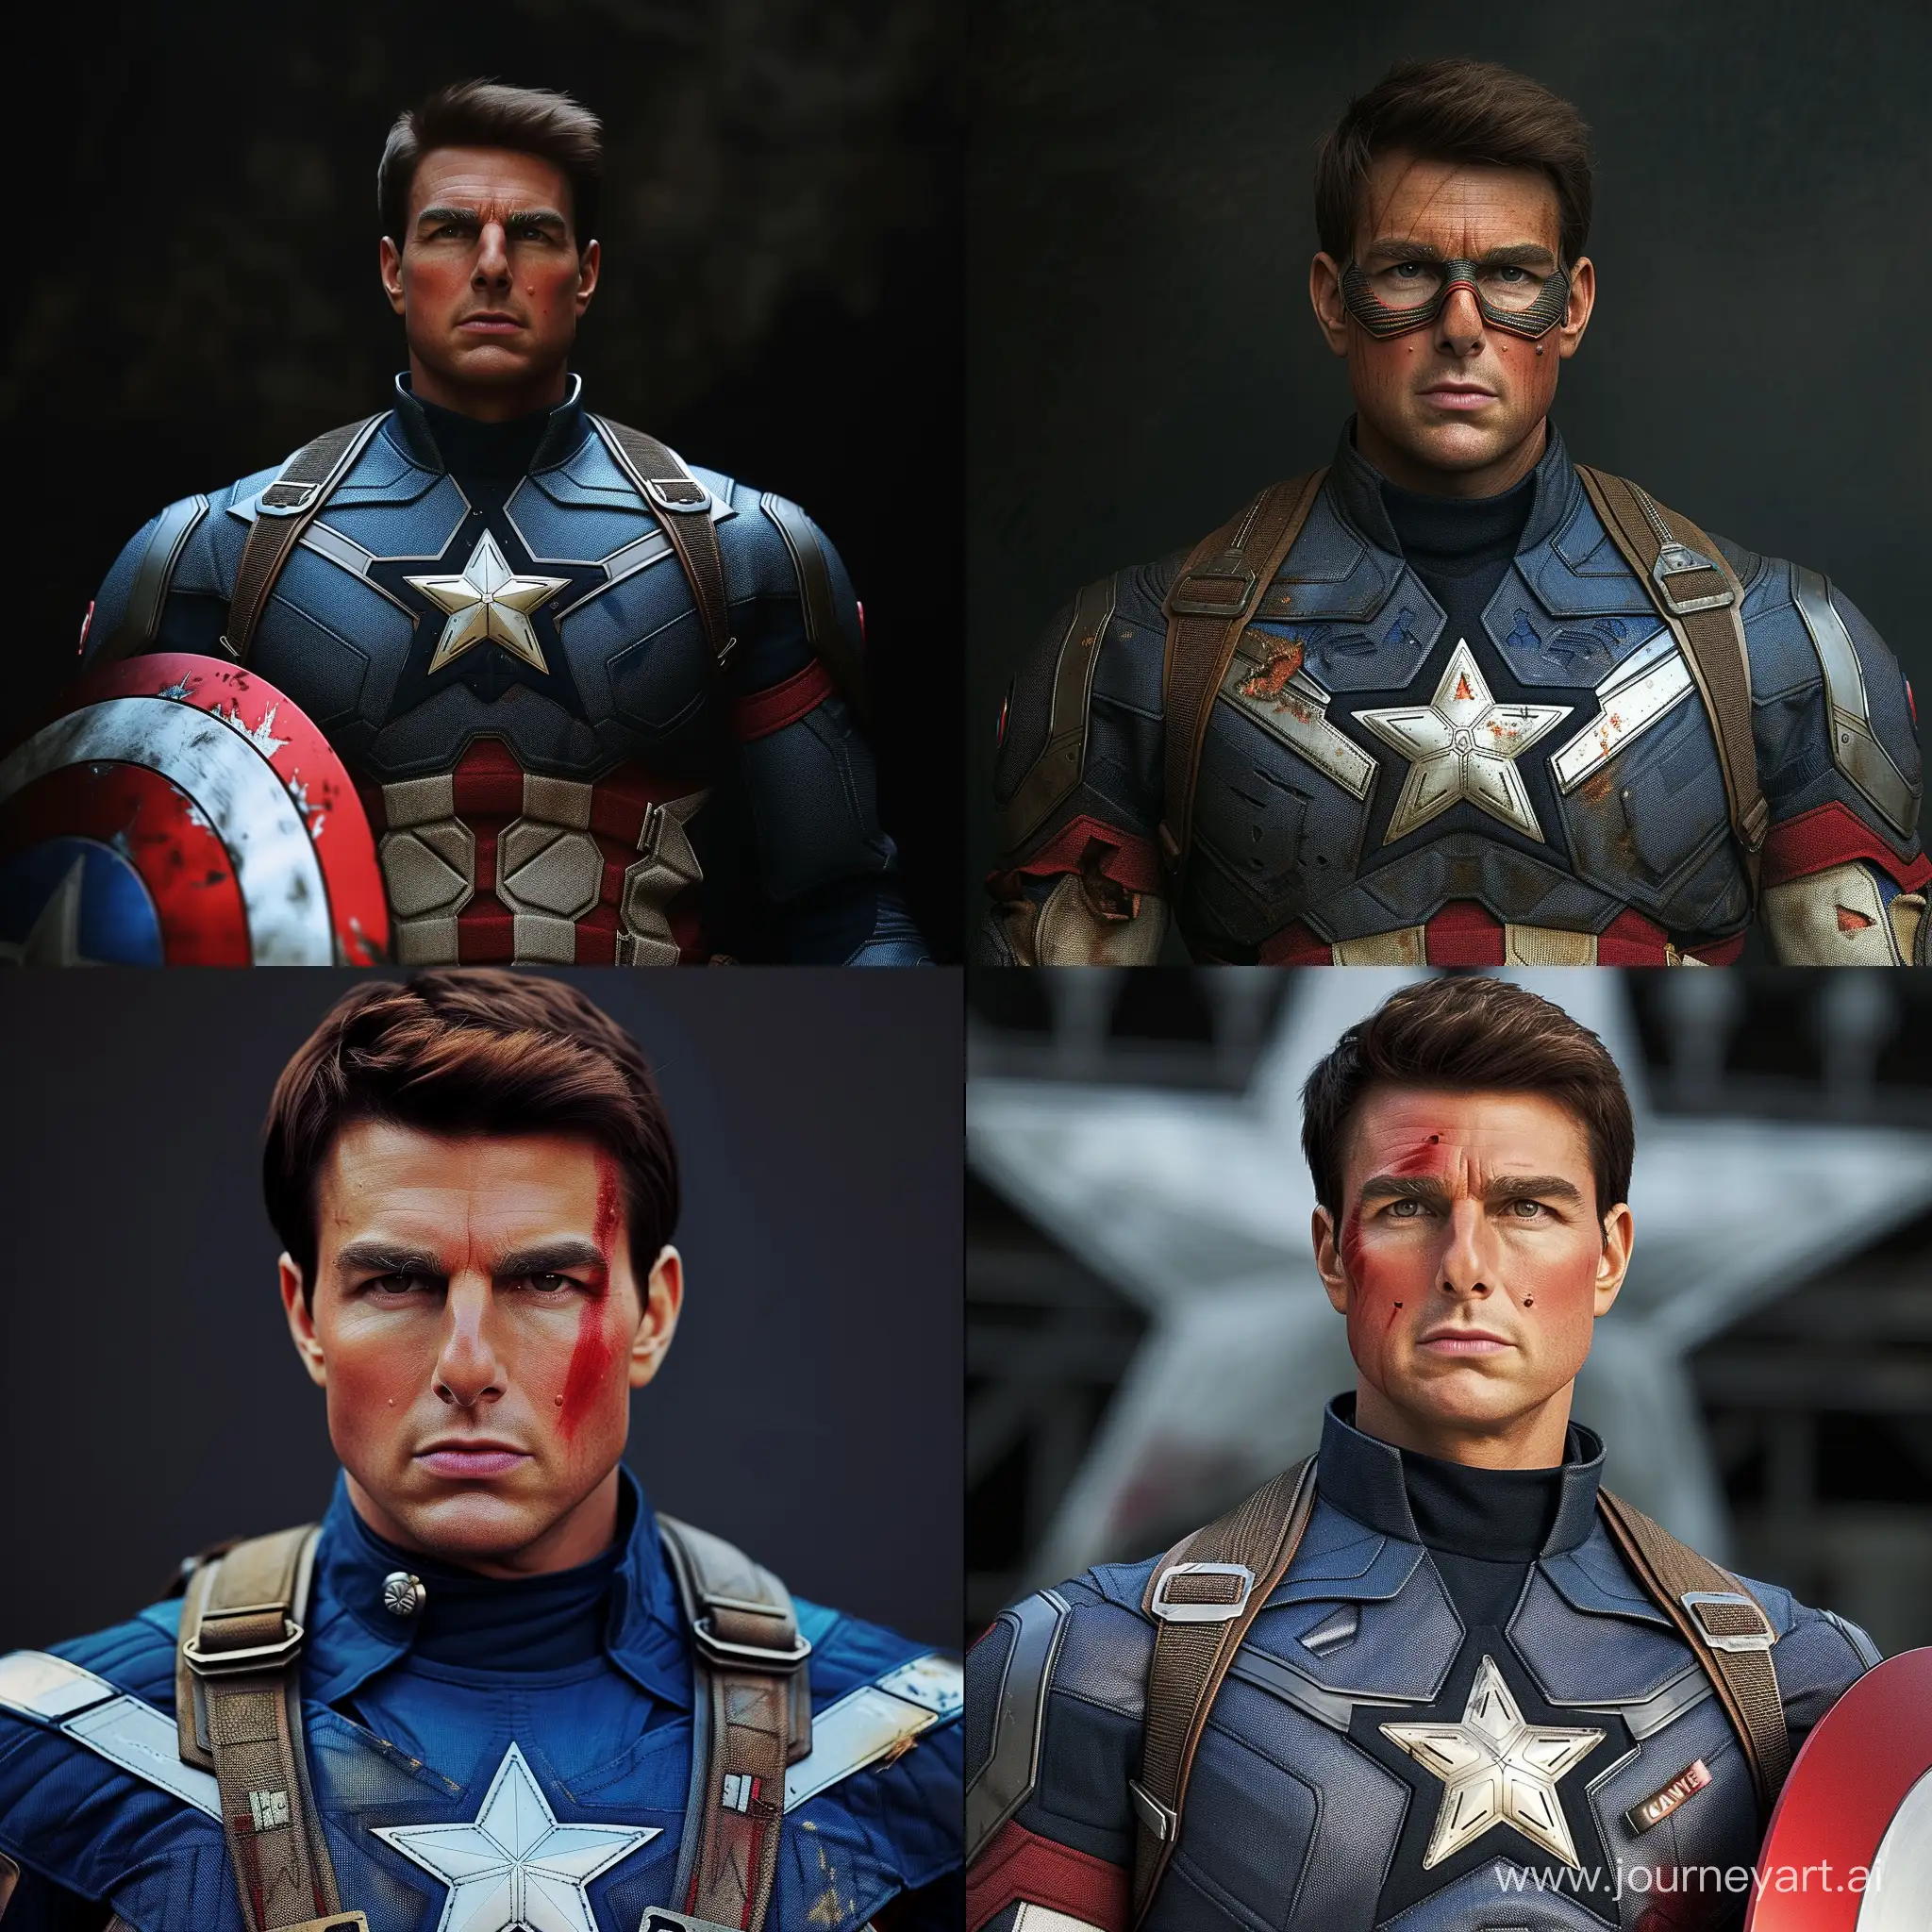 Tom cruise as captain America super realistic image high graphics